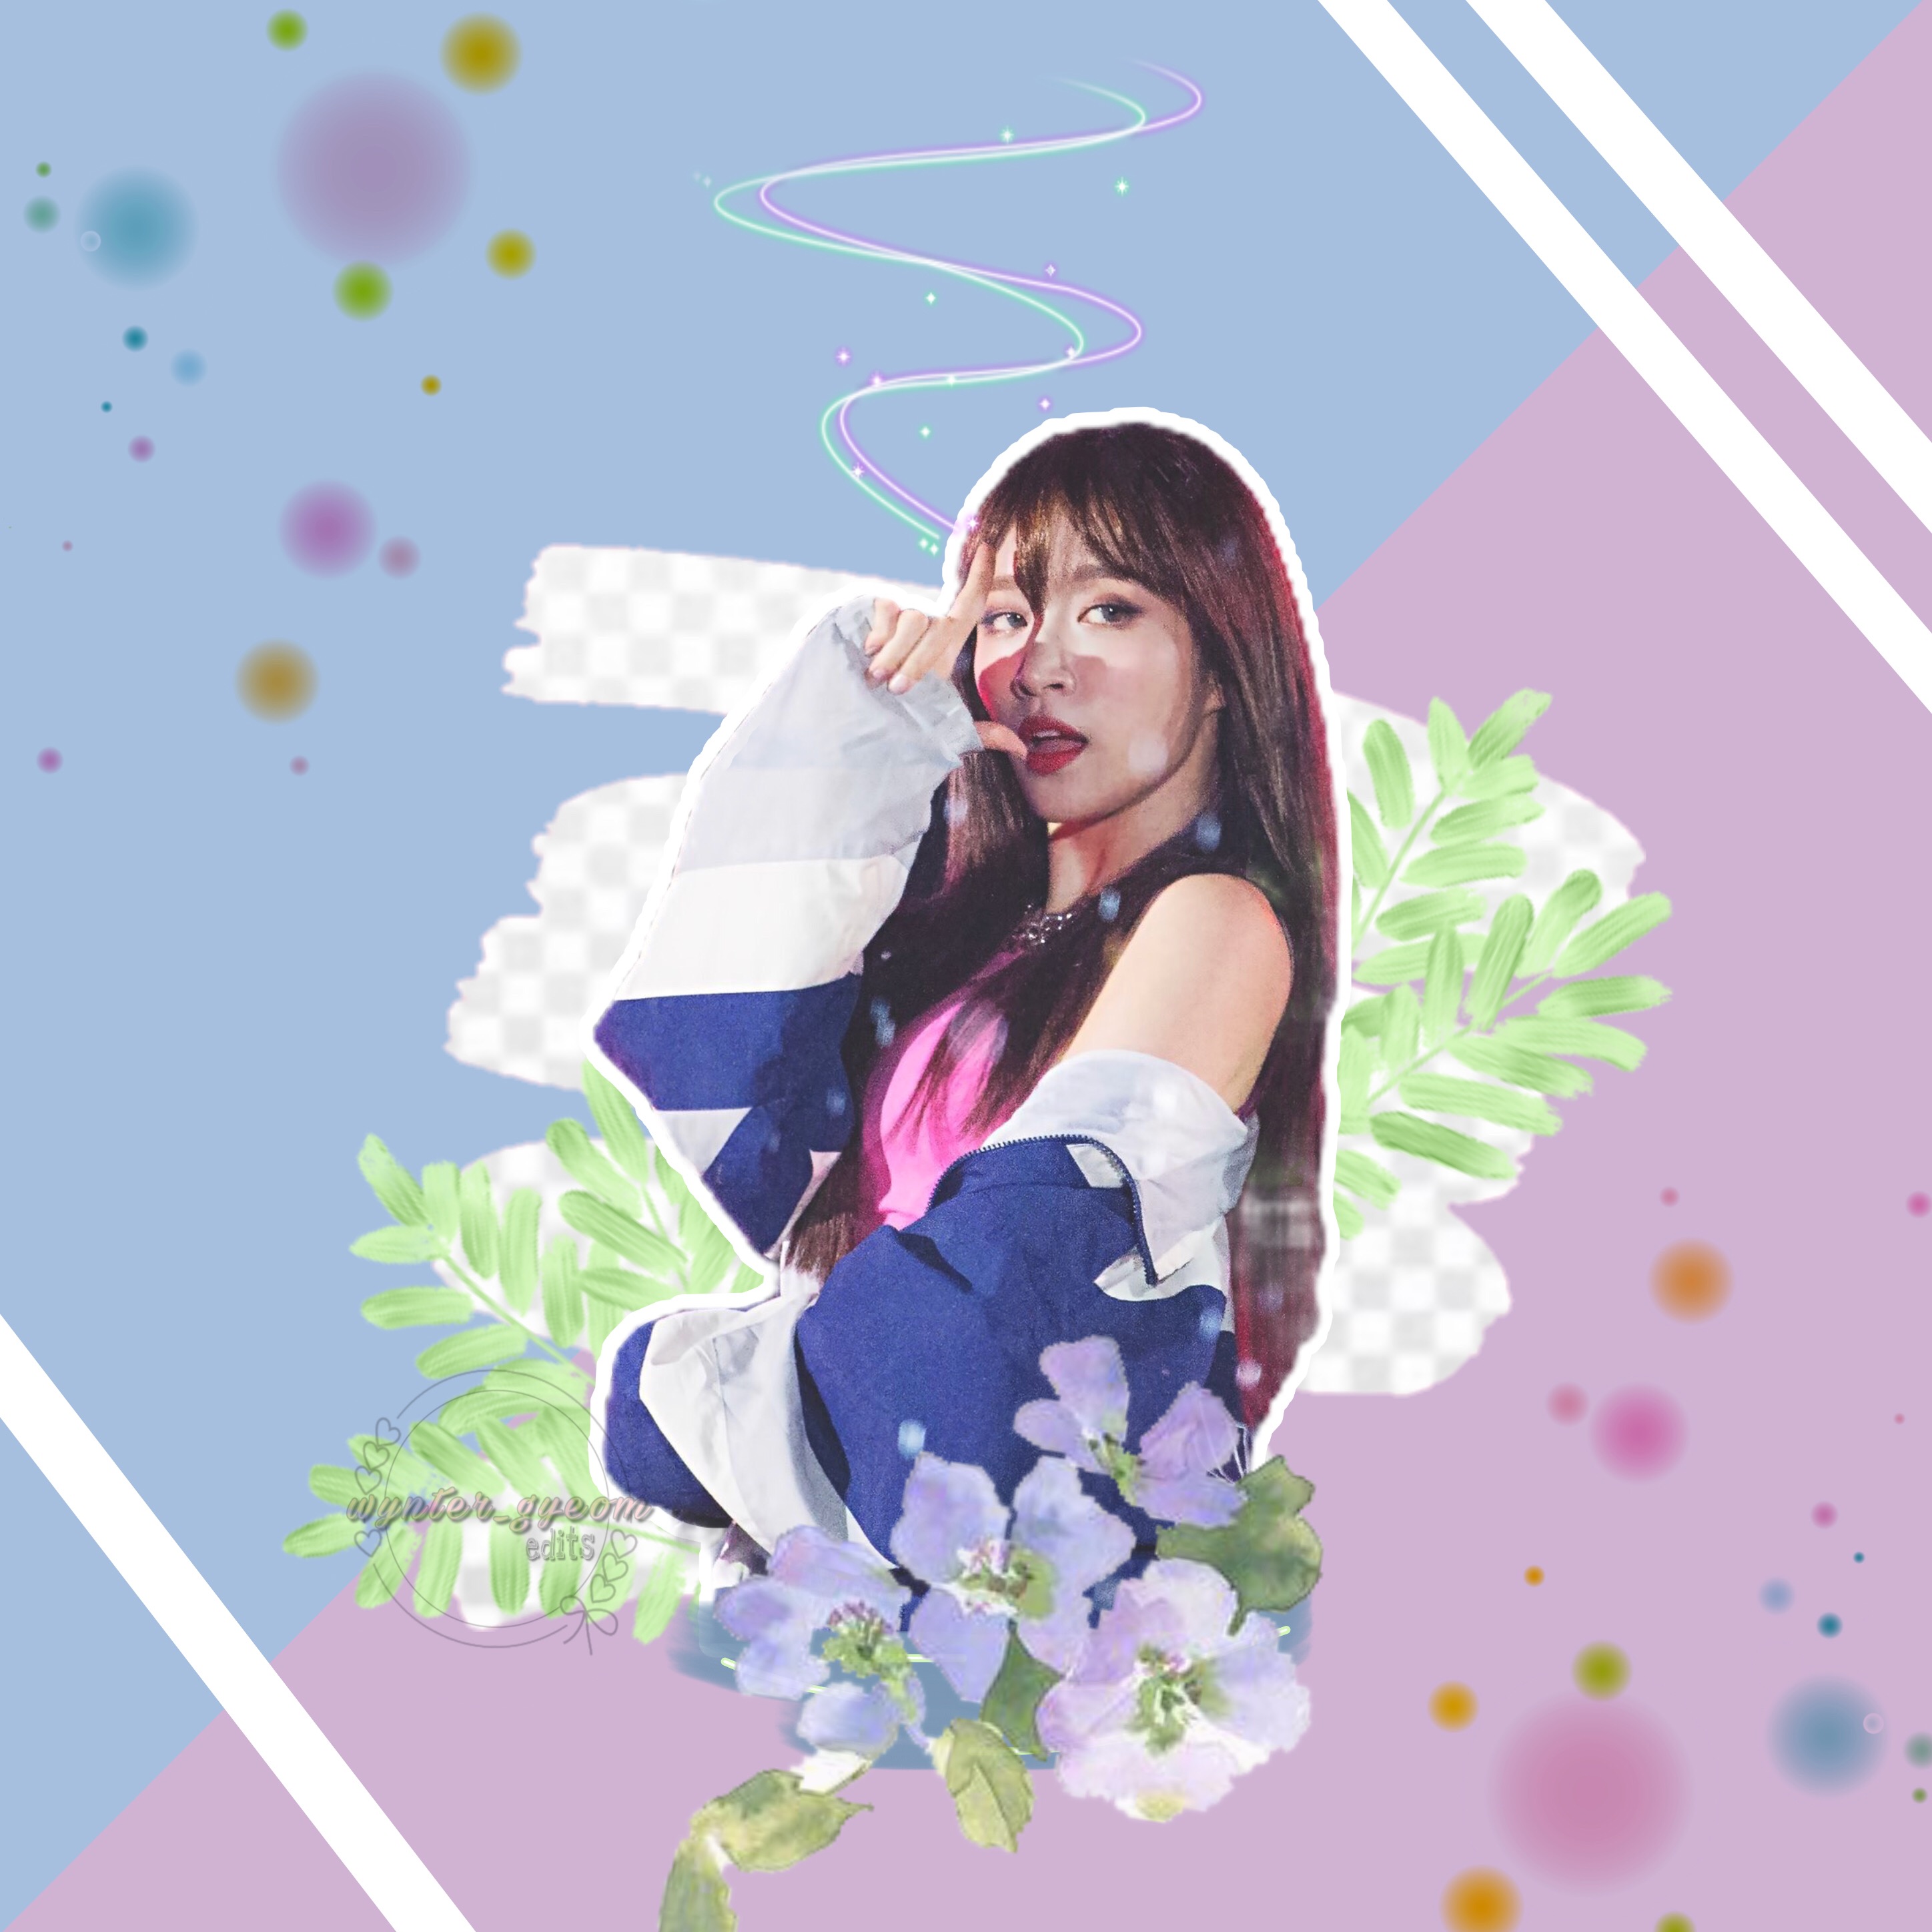 Hani 】♡ 【exid】 - I Love Her So Much ㅠㅠ tags - Girl - 2896x2896 ...